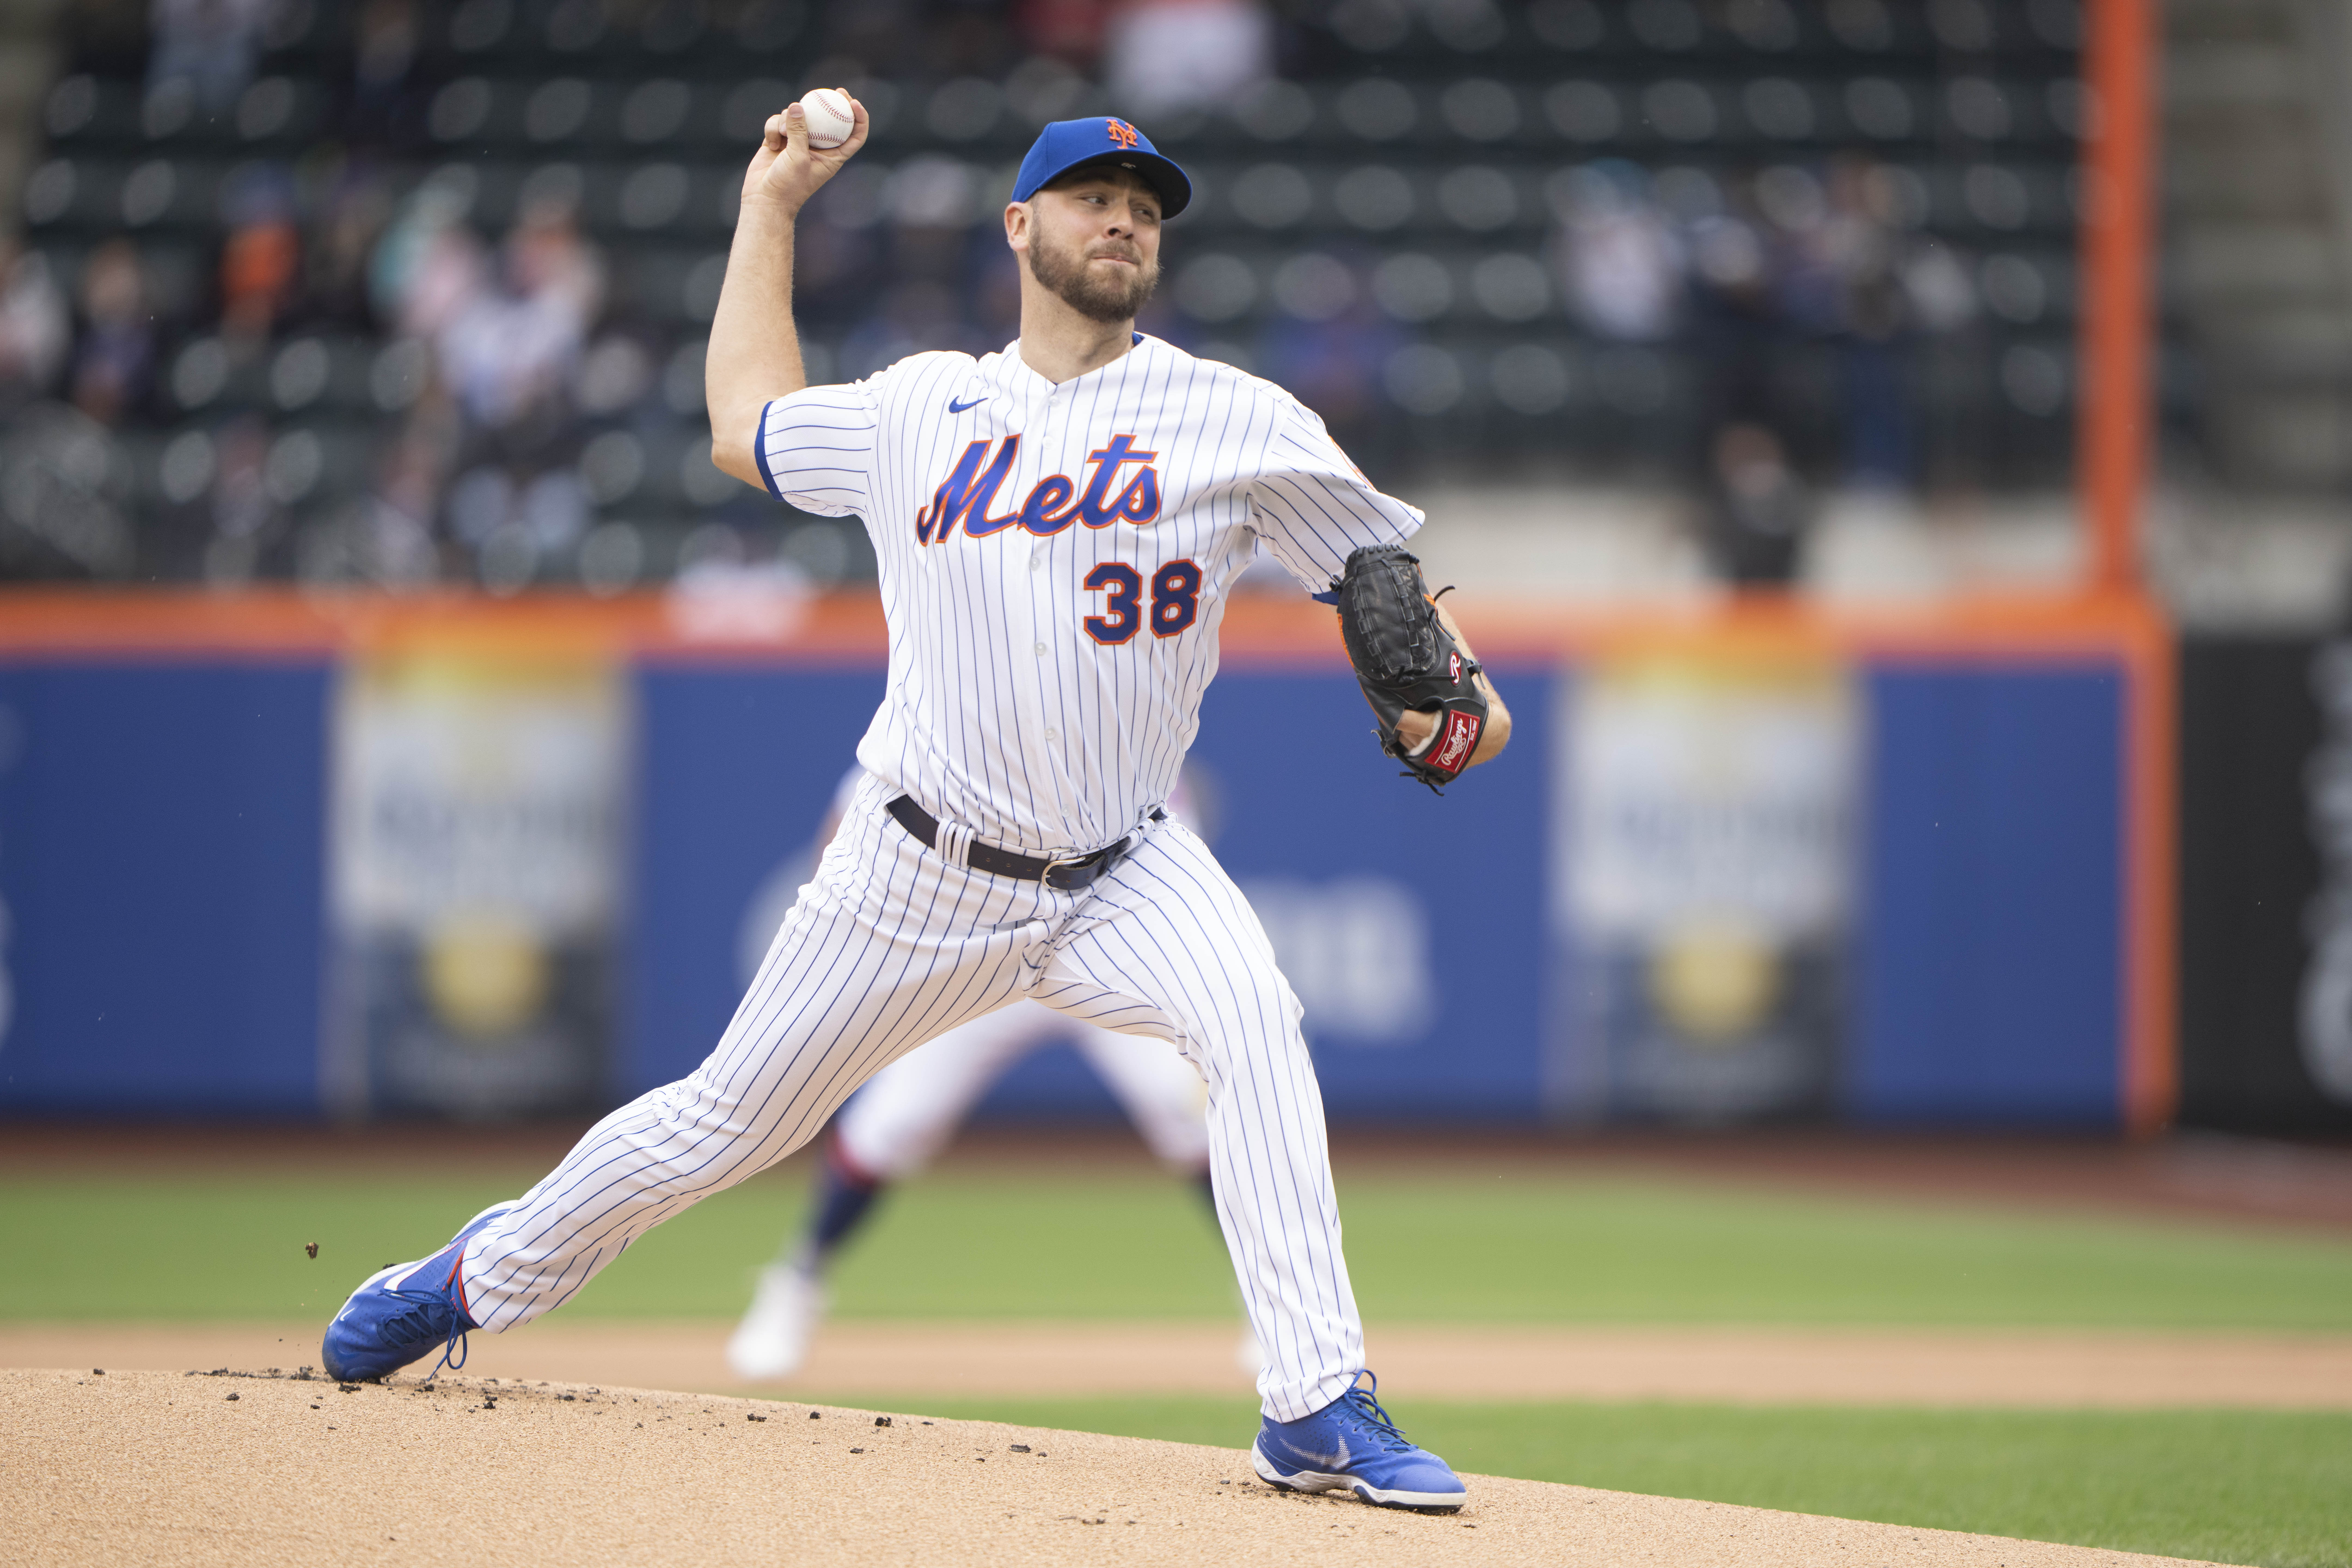 New York Mets pitcher Tylor Megill (38) delivers a pitch against the Atlanta Braves during the first inning at Citi Field.